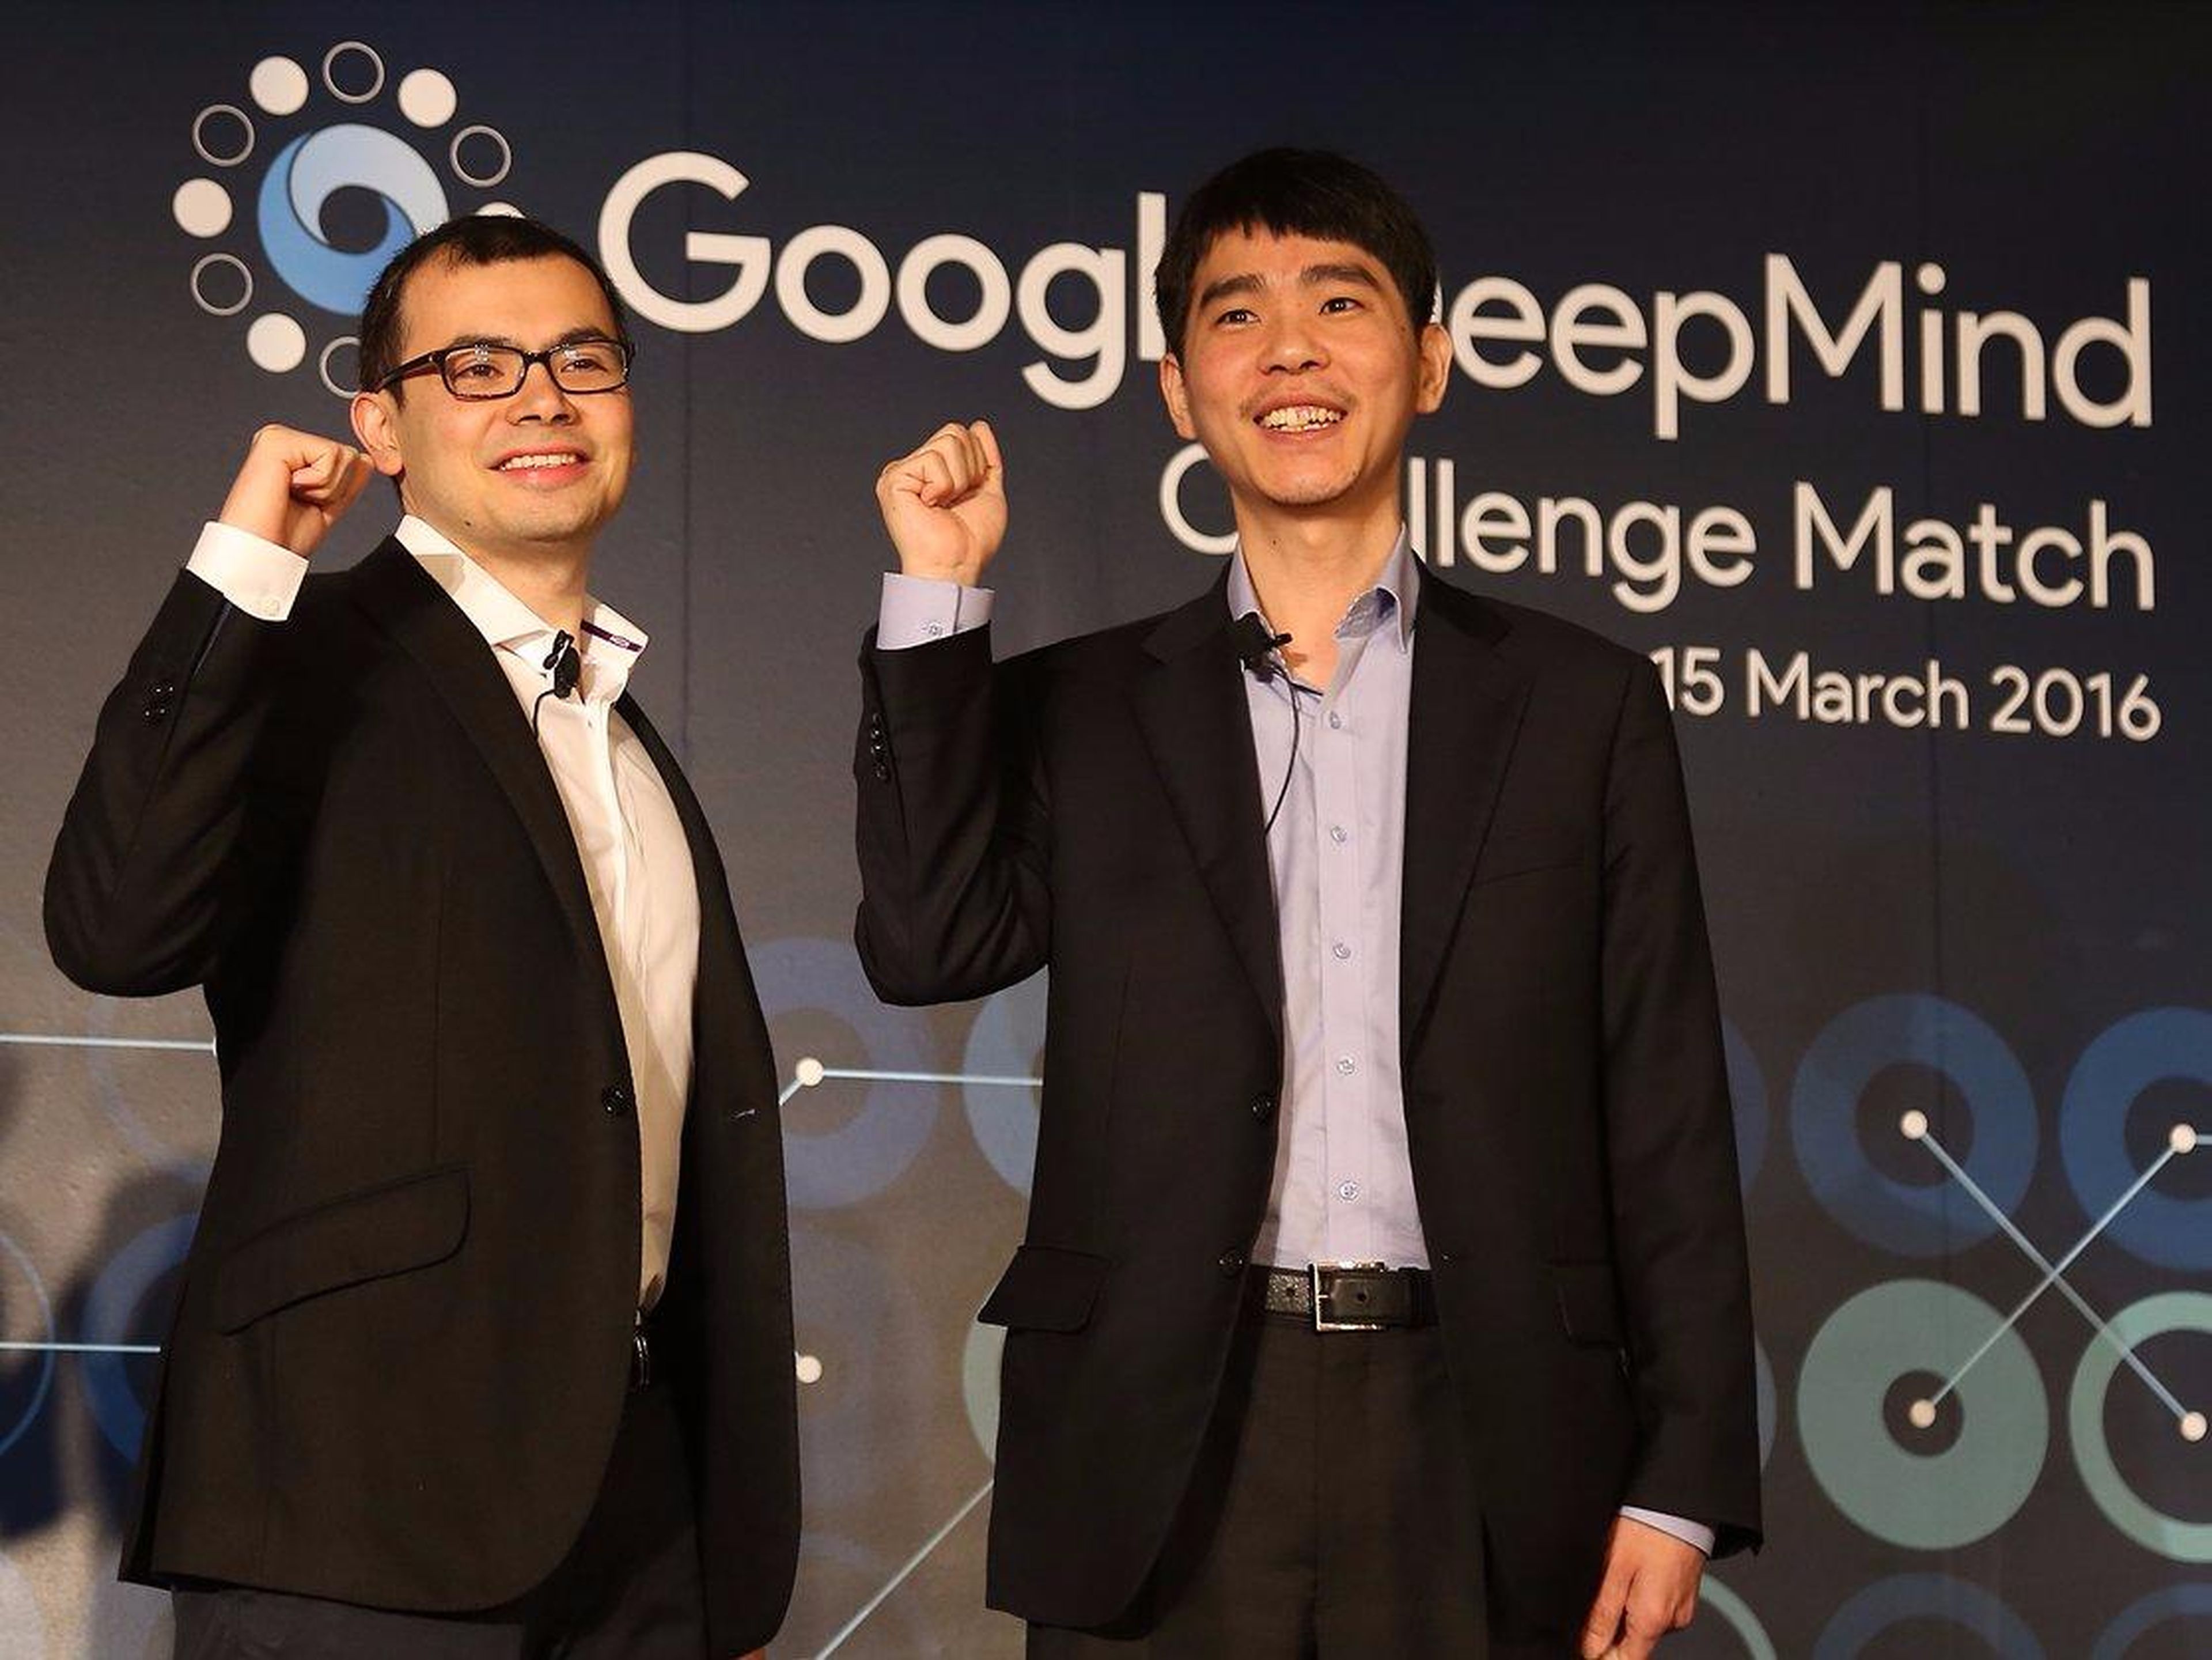 Based in London, DeepMind is an artificial intelligence company that Google acquired in 2014 and is now setting up a sizable new team in the US in order to increase collaboration within Google.